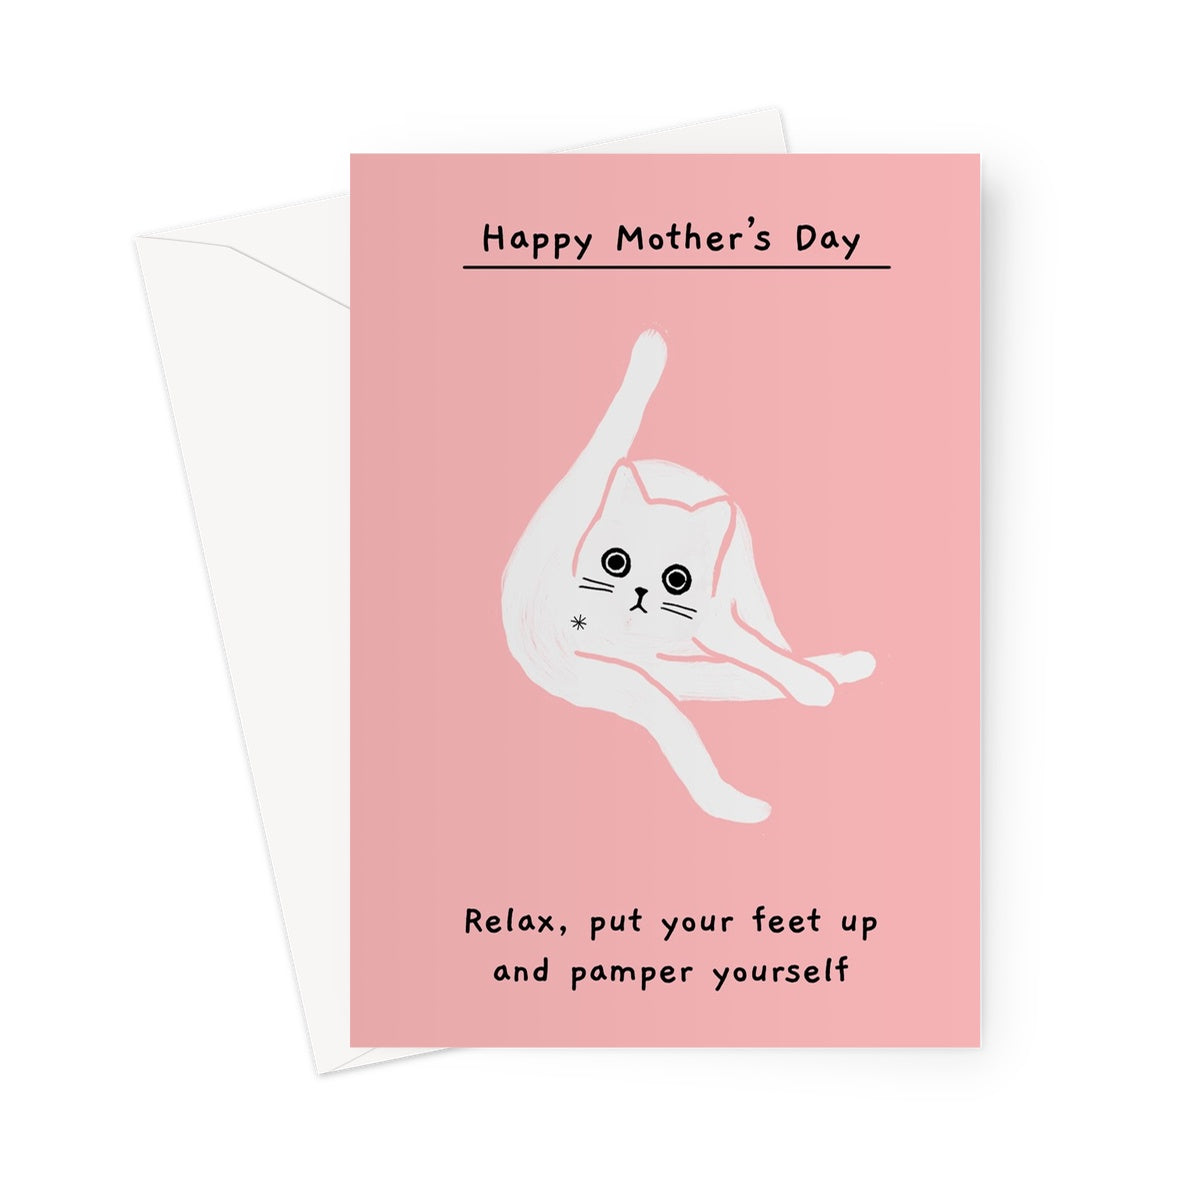 Pamper Yourself - Happy Mother's Day Card